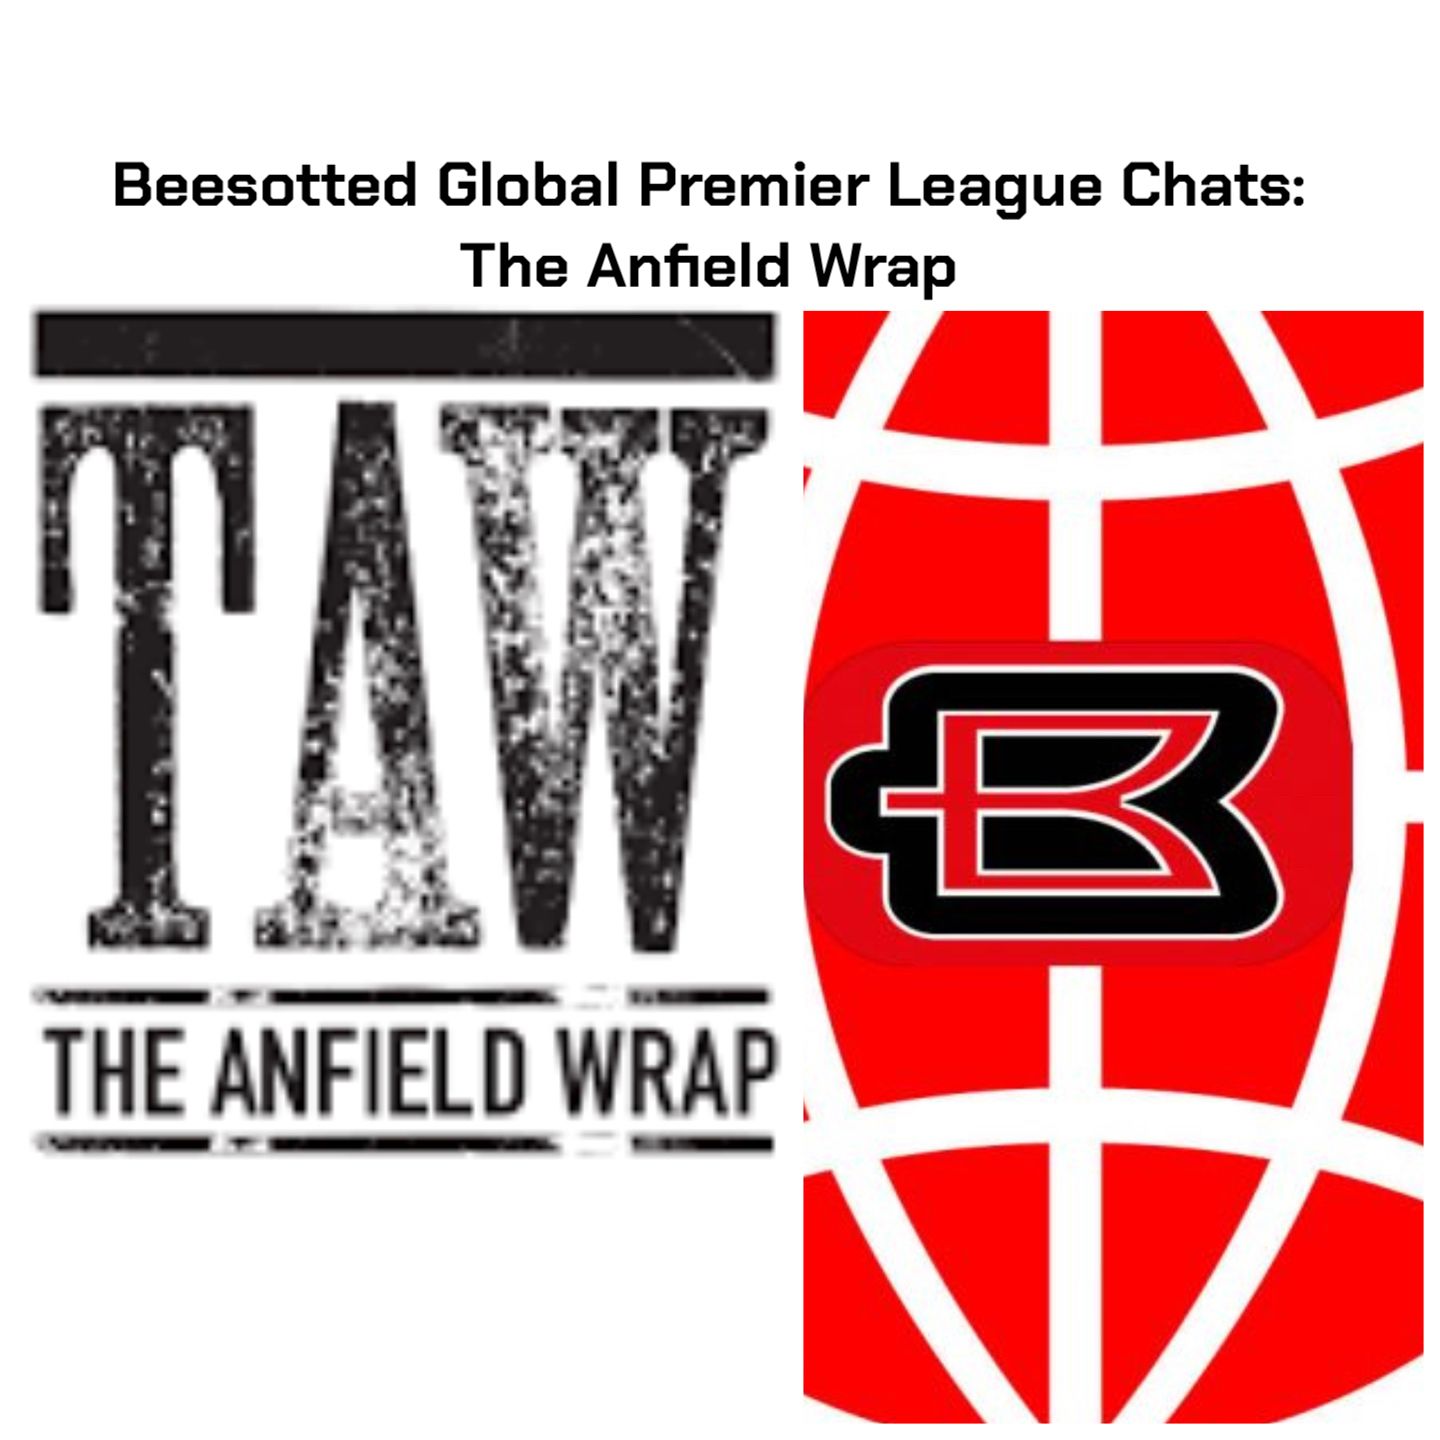 879: Beesotted Global Premier League Chats - Liverpool Podcast The Anfield Wrap